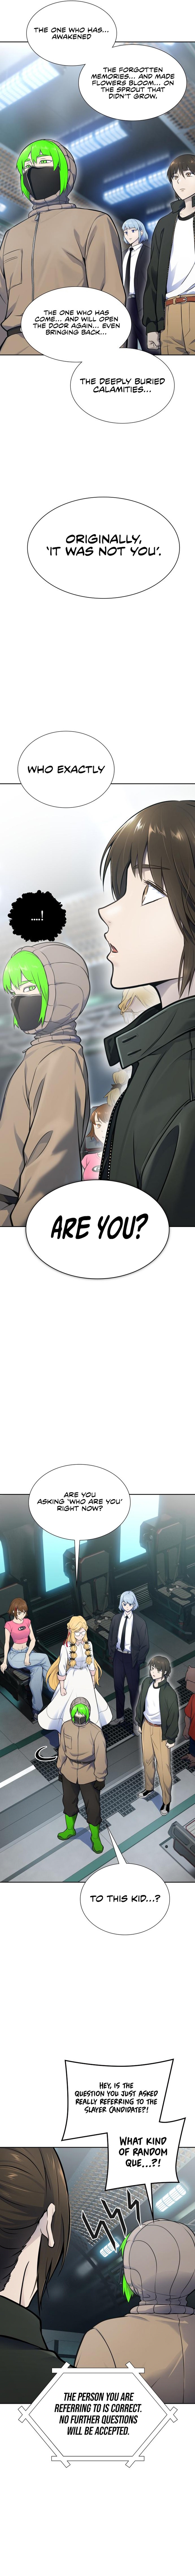 Tower Of God Chapter 597 Page 10